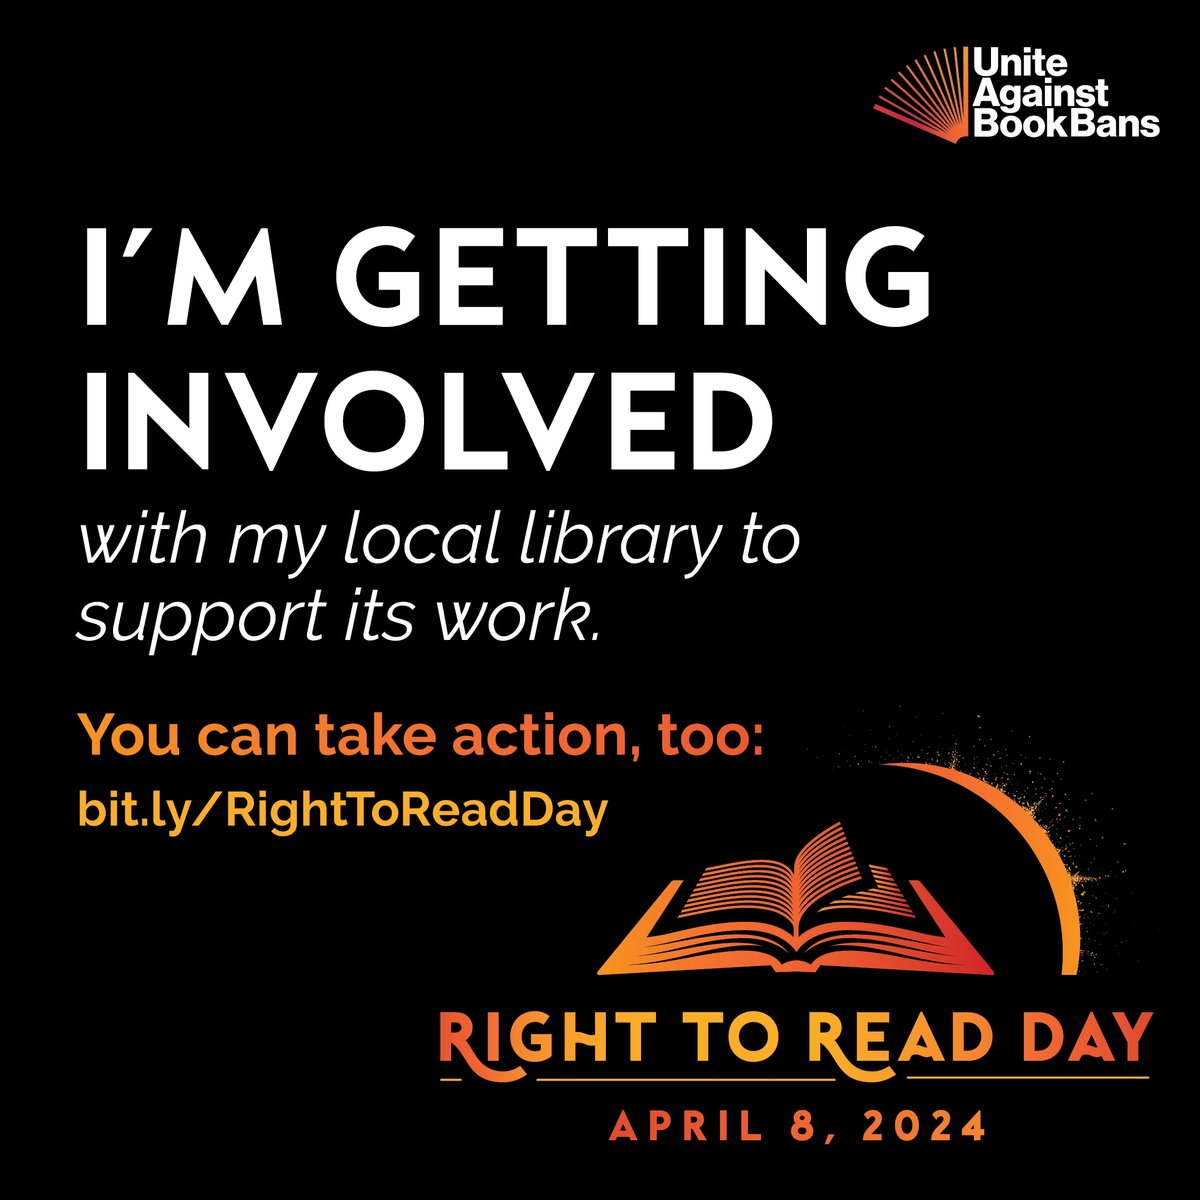 Happy National Library Week & Right to Read Day! 📖 Let's celebrate the joy of reading & the importance of free access to knowledge. #NationalLibraryWeek #RightToReadDay 📚 bit.ly/RightToReadDay